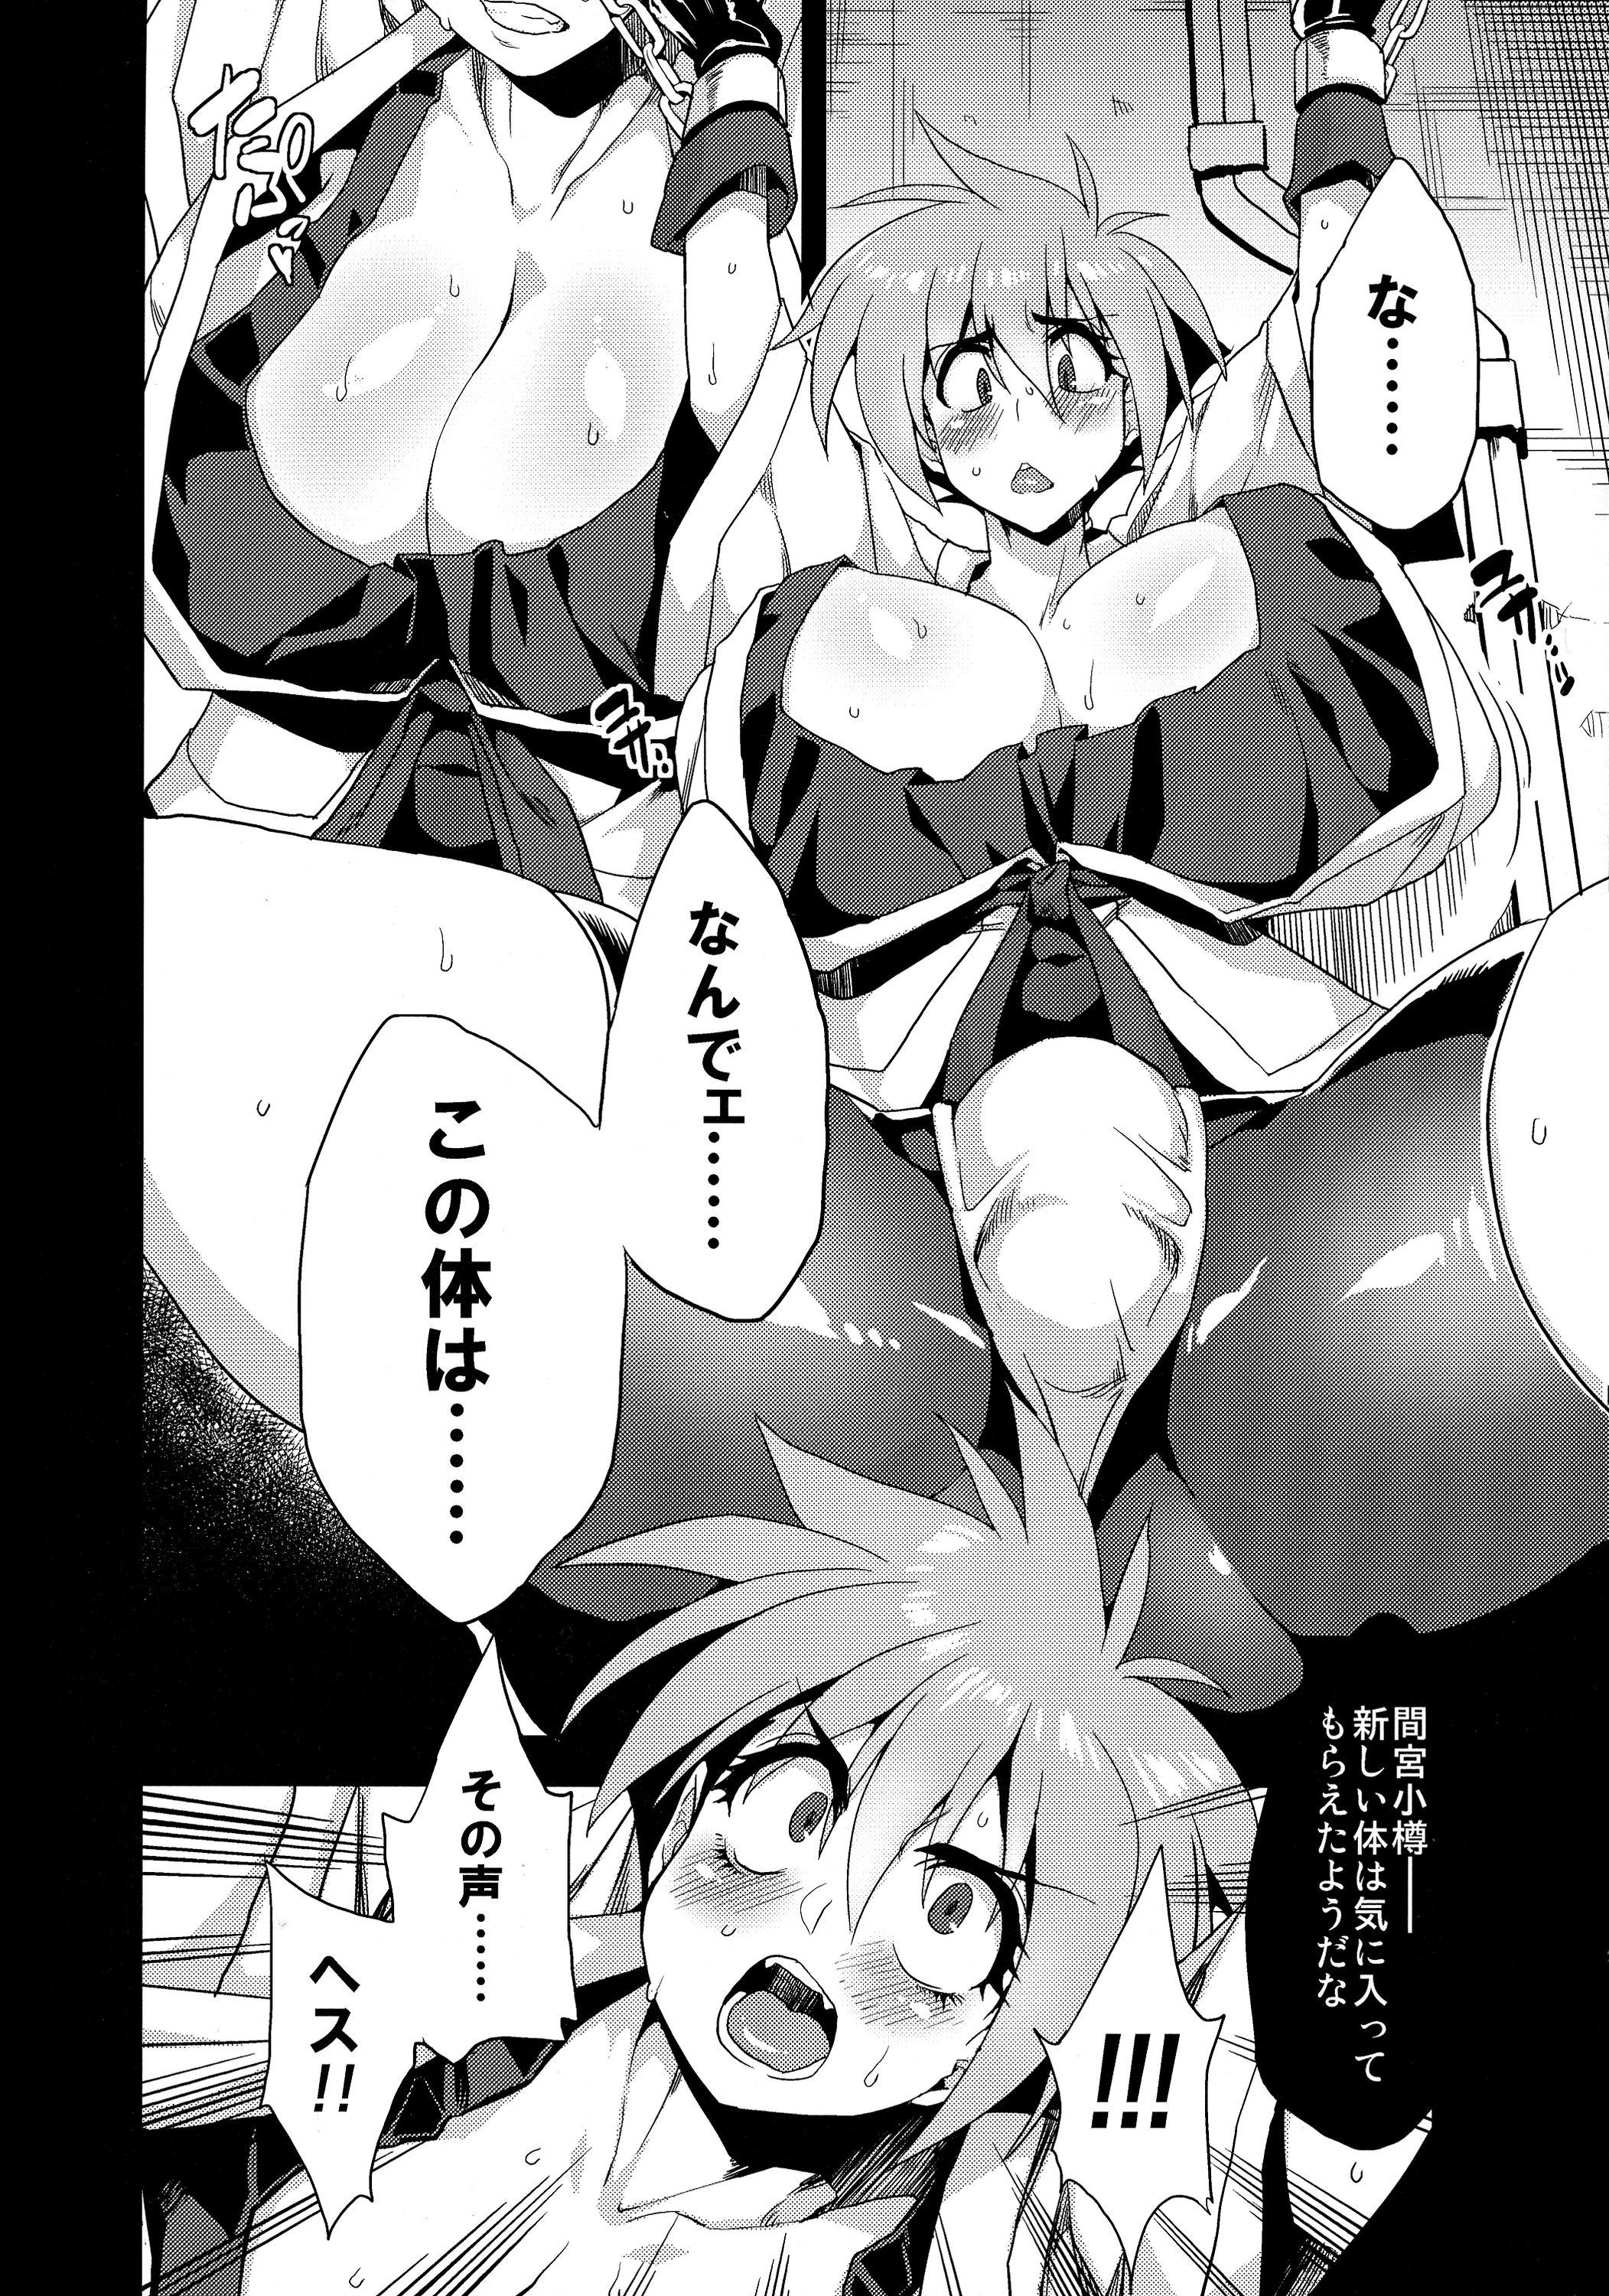 Gang Hentai Marionette 3 - Saber marionette HD - Page 4